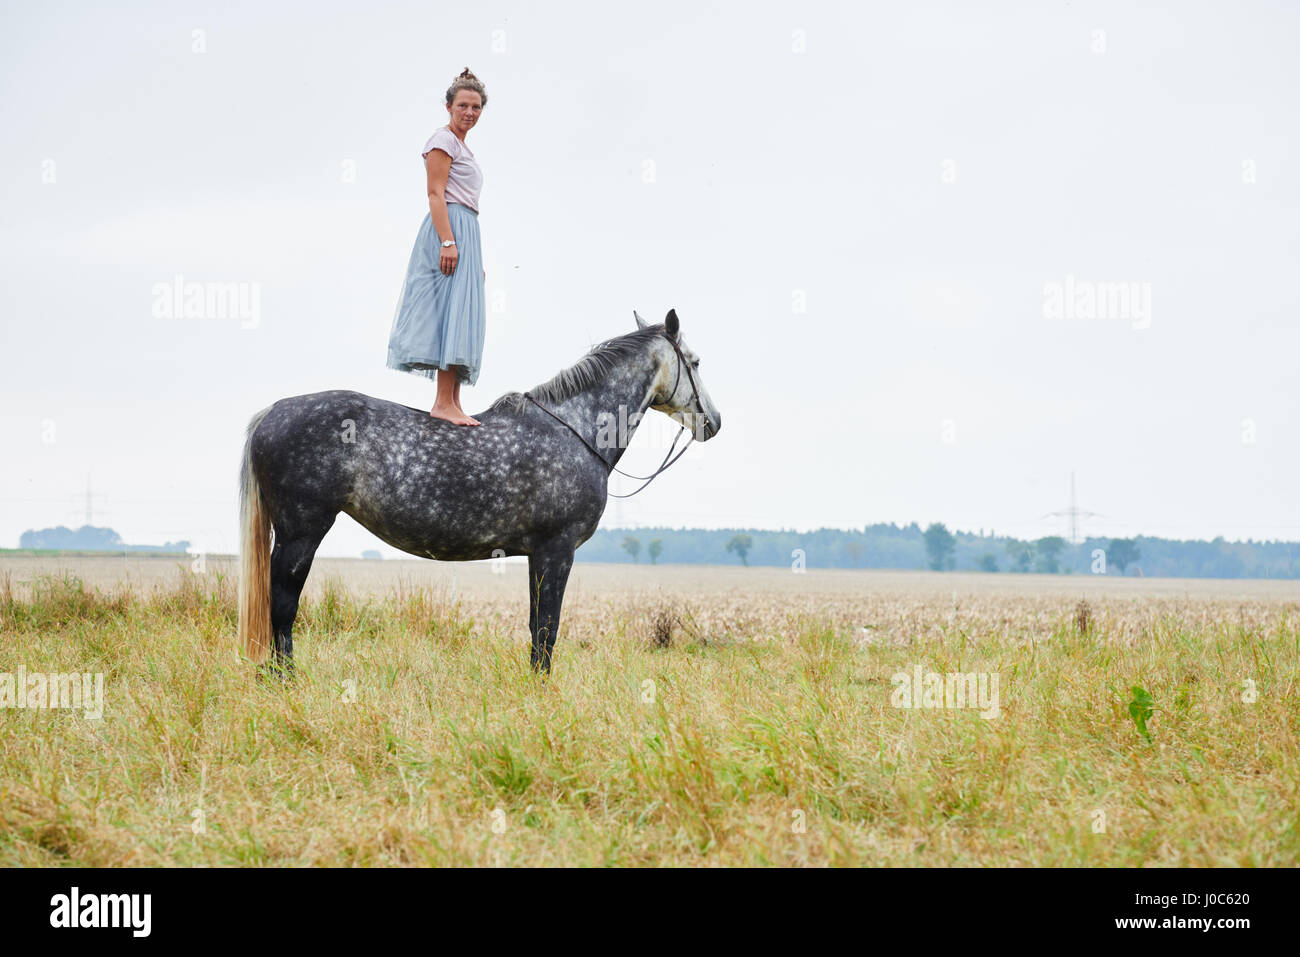 Woman in skirt standing on top of dapple grey horse in field Stock Photo